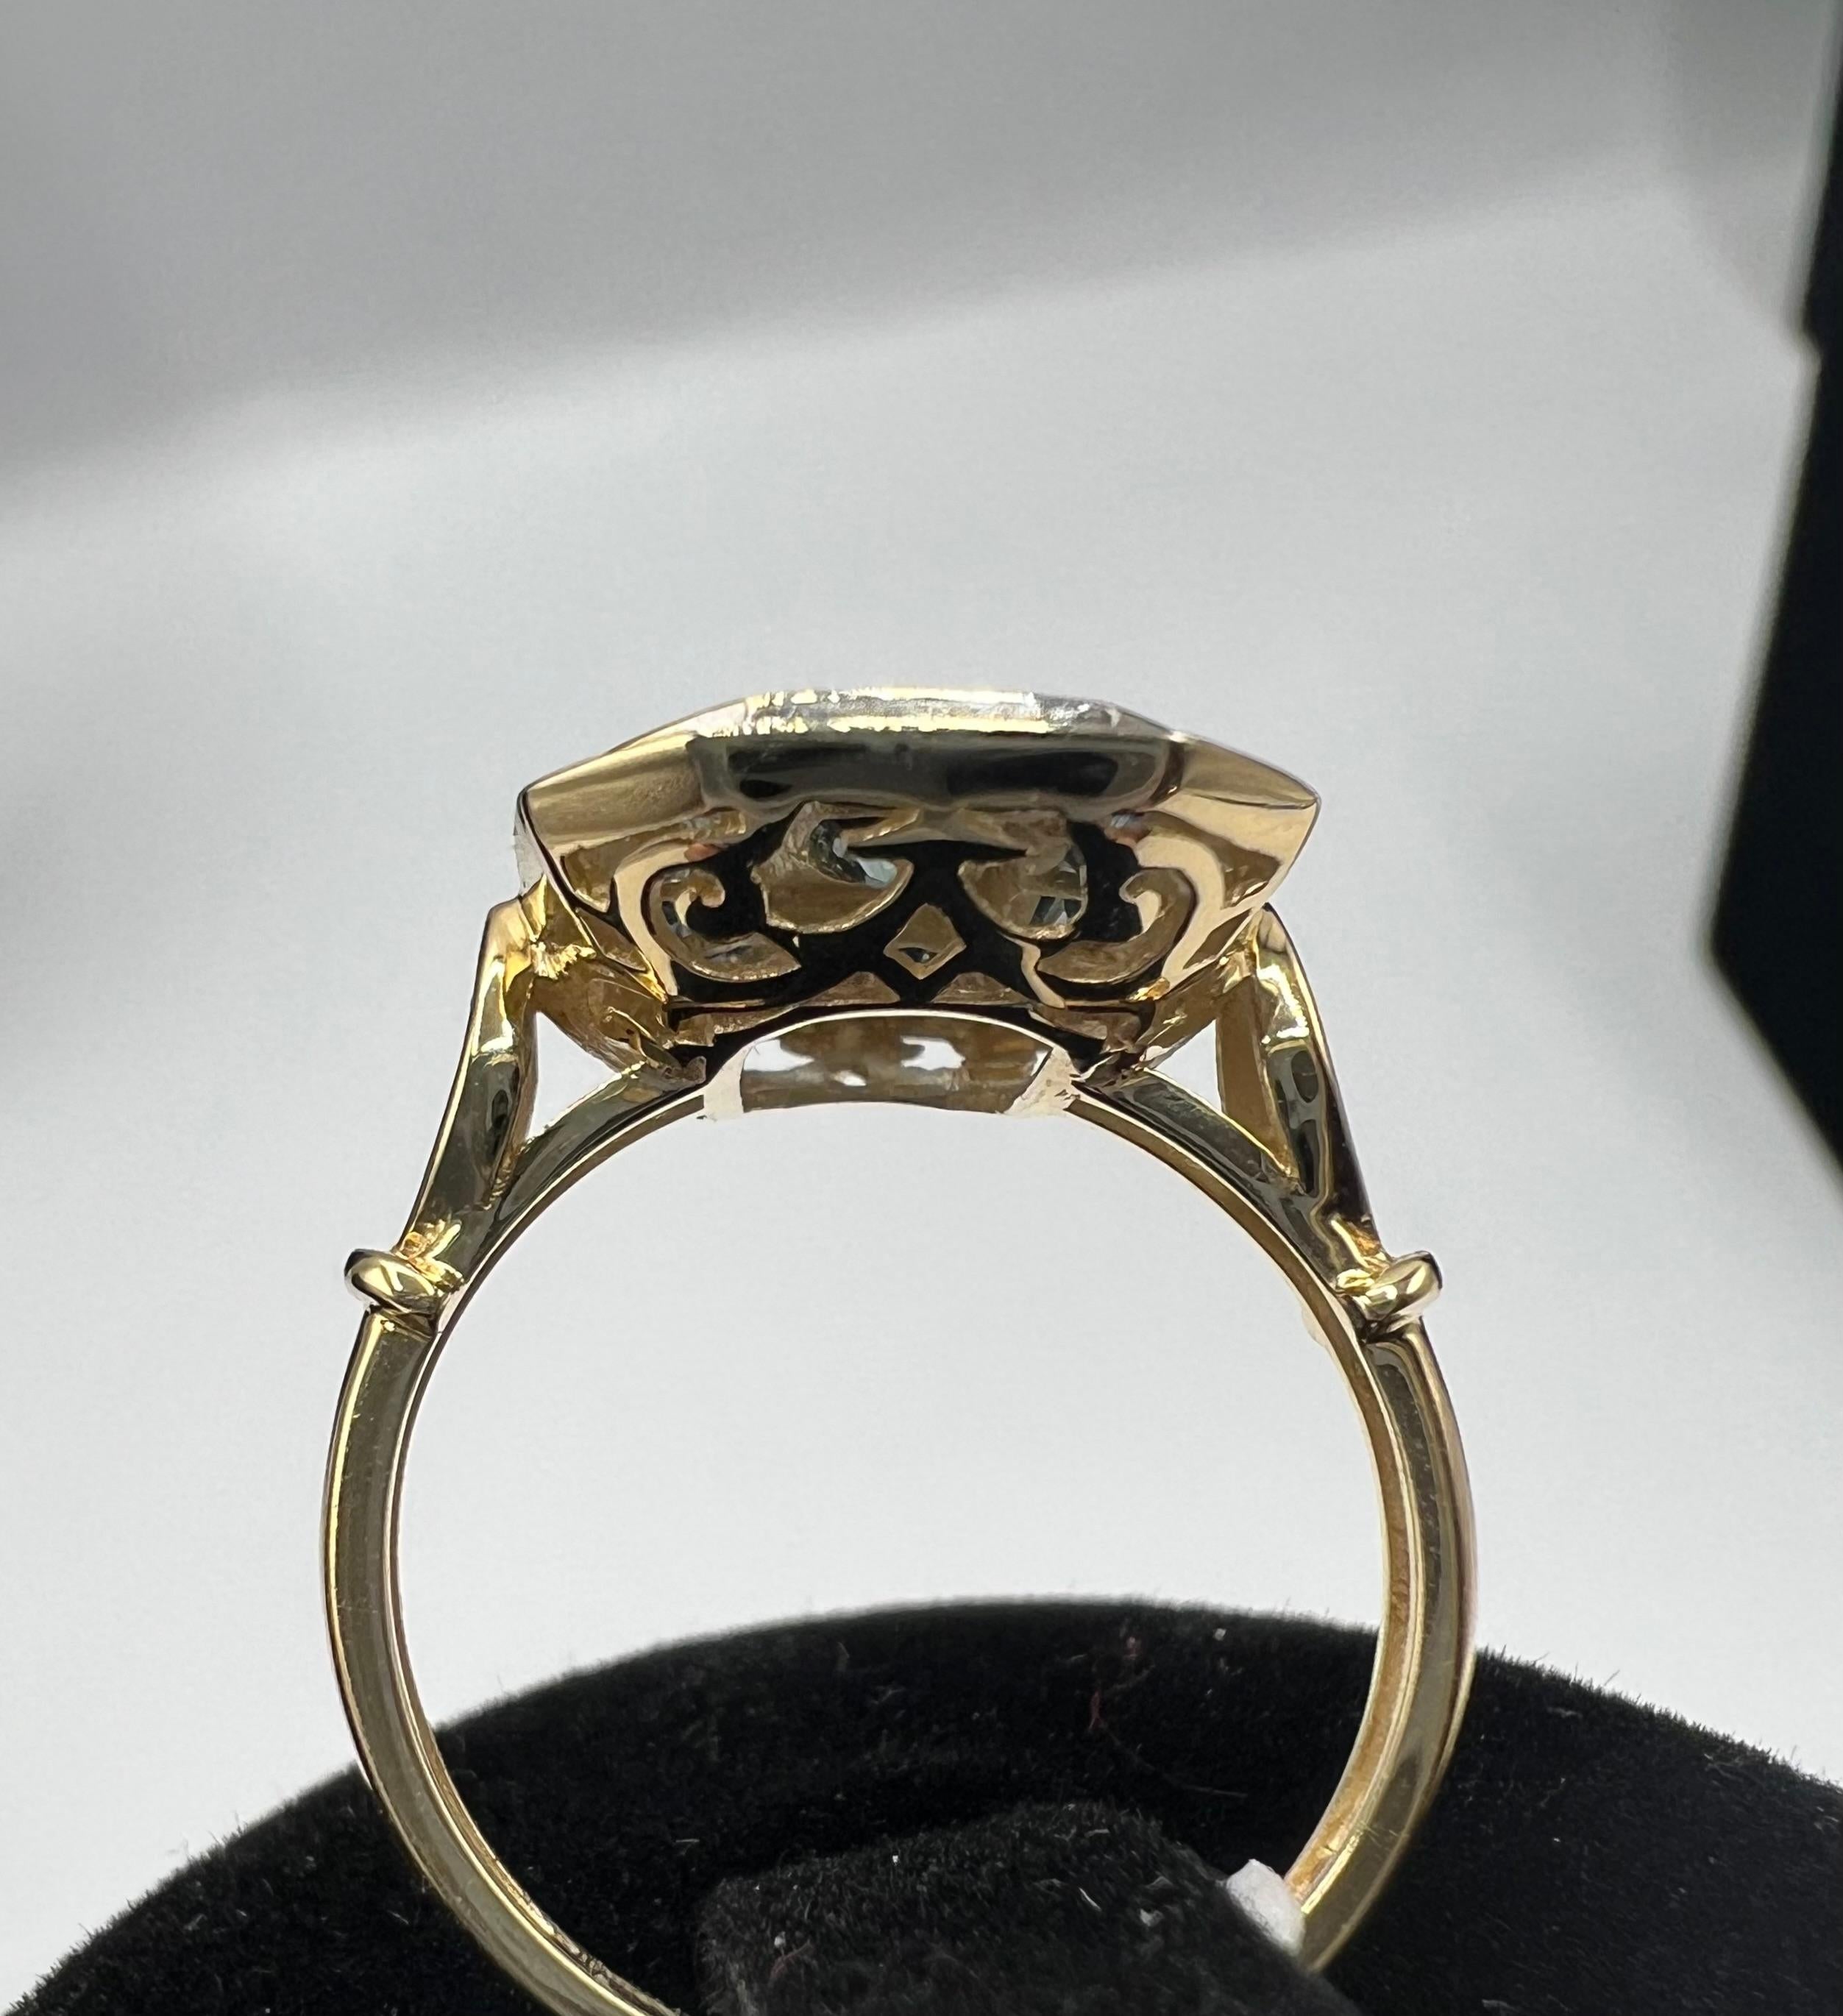 ring n 7403 
A ring in 18 carat gold weighing 4.35 grams in total paving of calibrated sapphires for 1.79 in total approximately paving of modern cut diamonds for 0.15 in total approximately size 52 in the spirit of art deco, manufacture in the